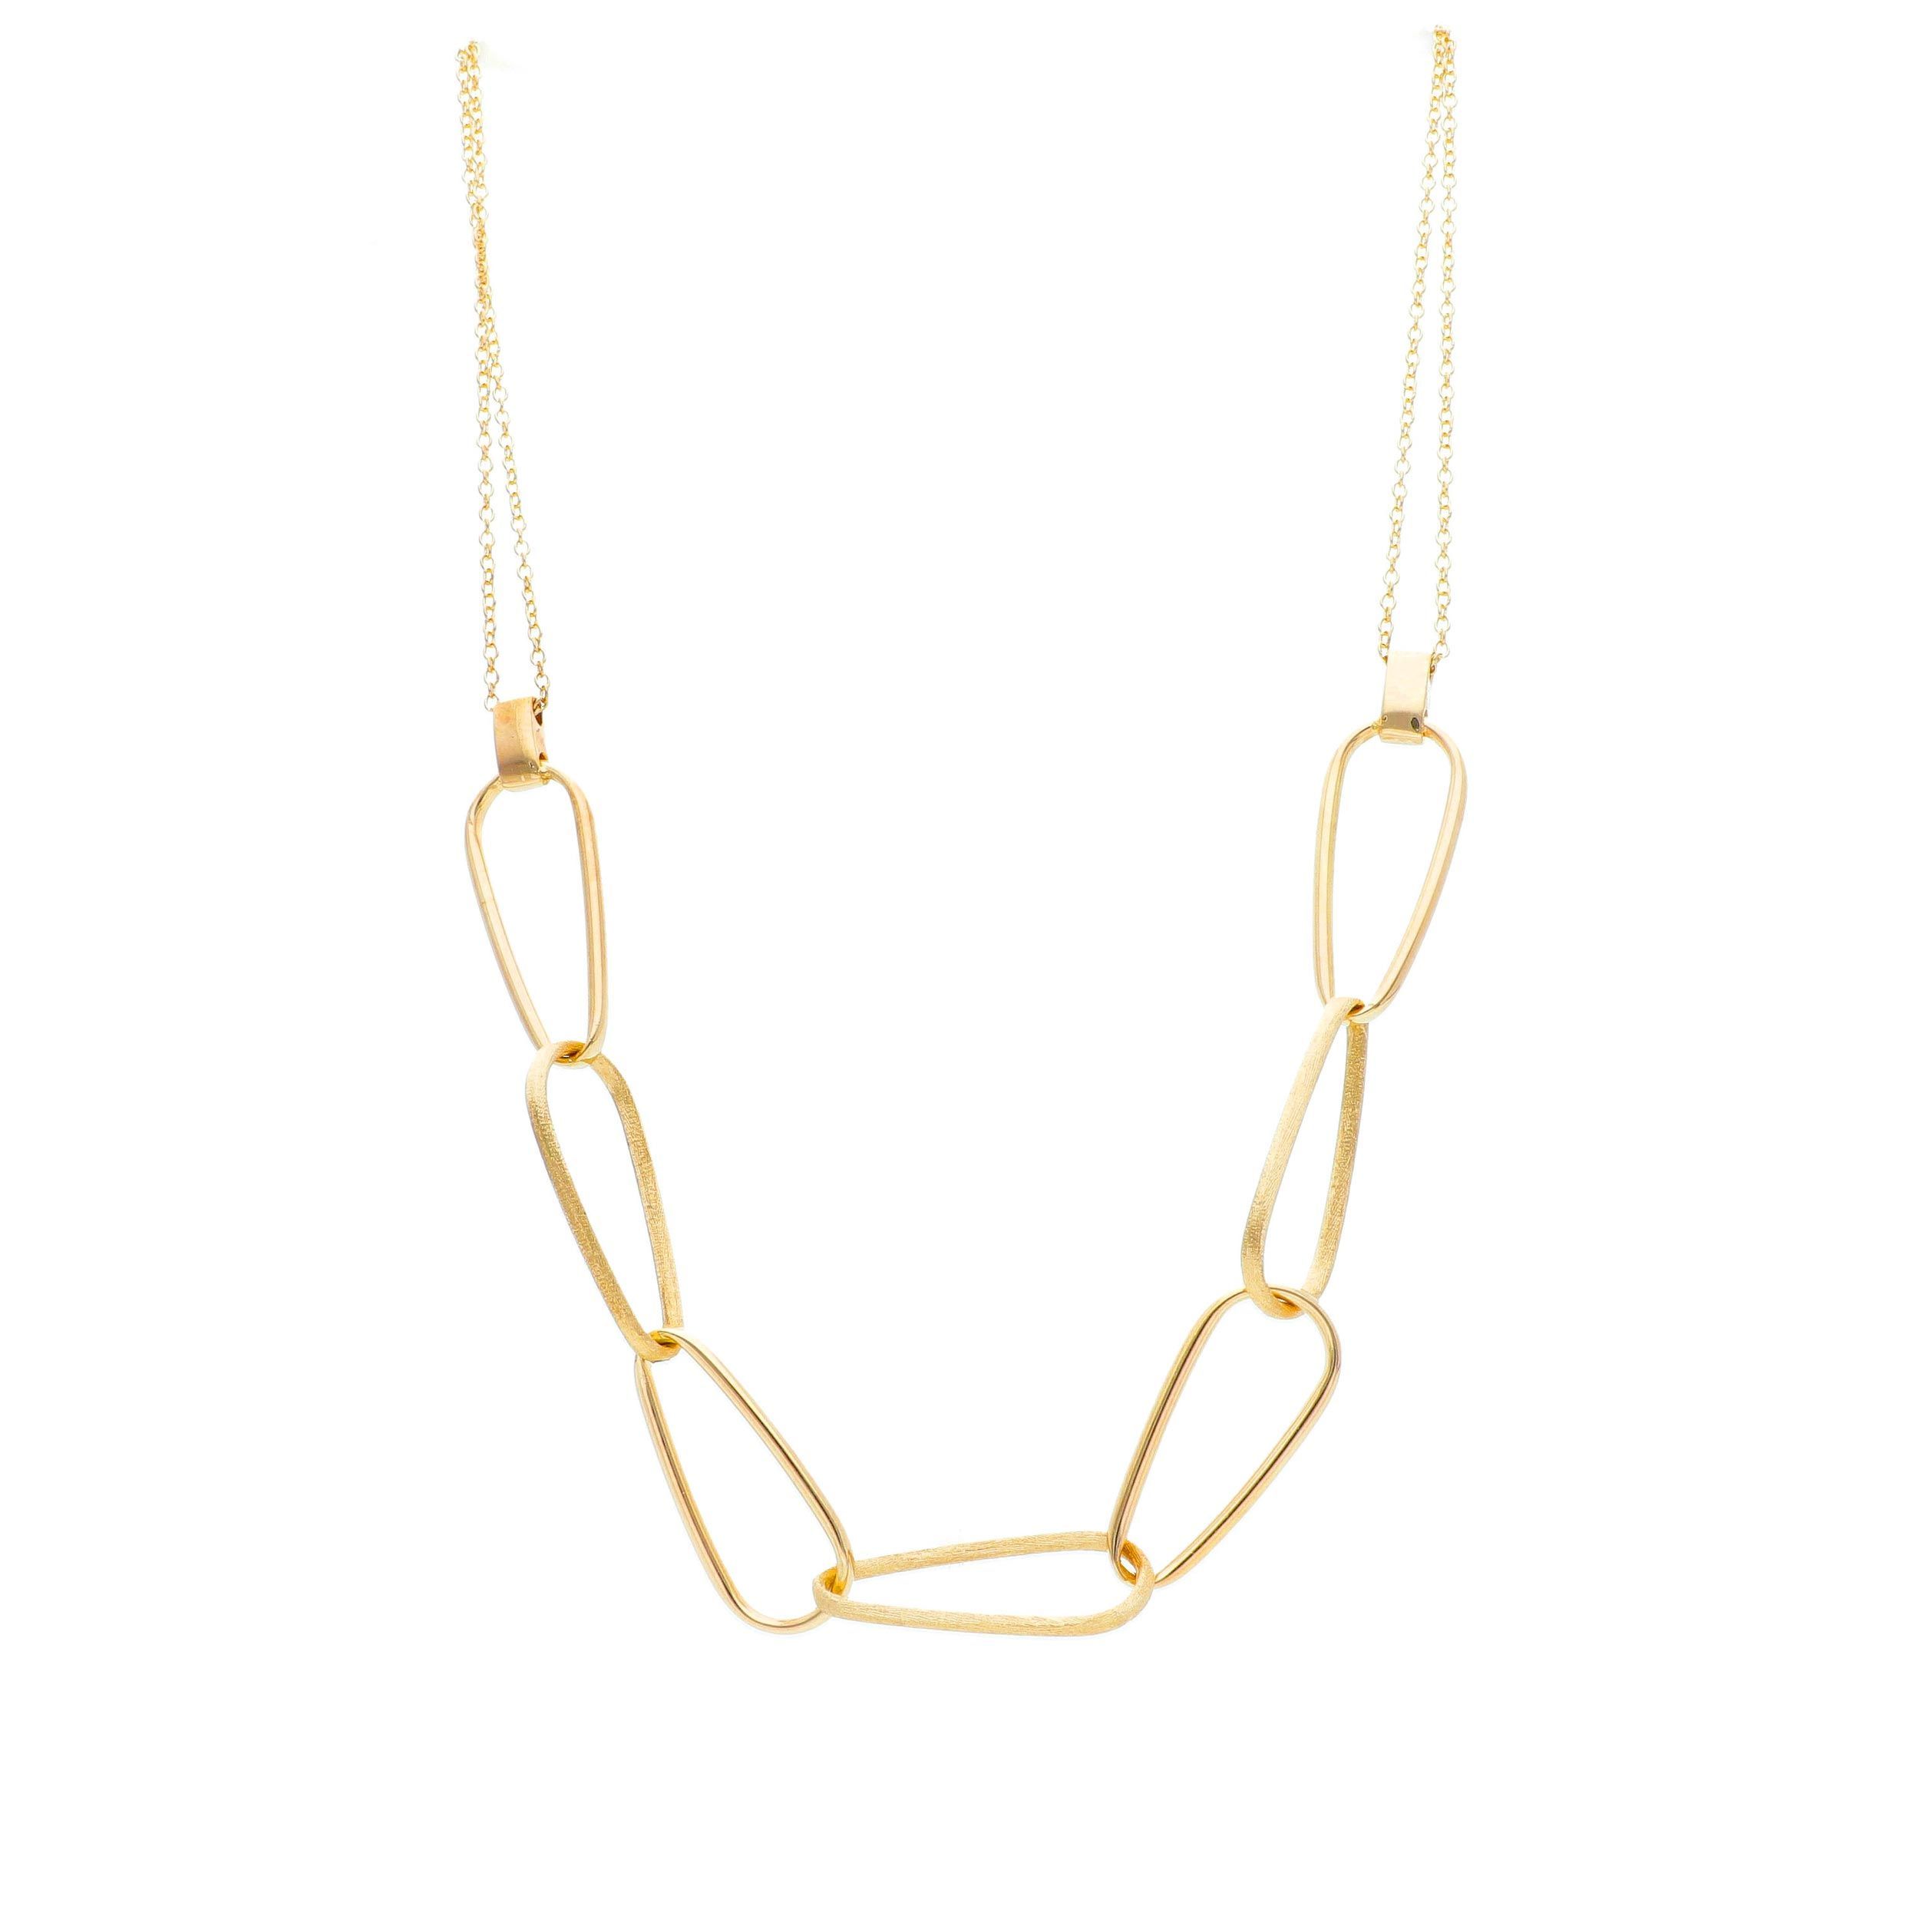 Golden necklace k14 with oval rings (code S246032)